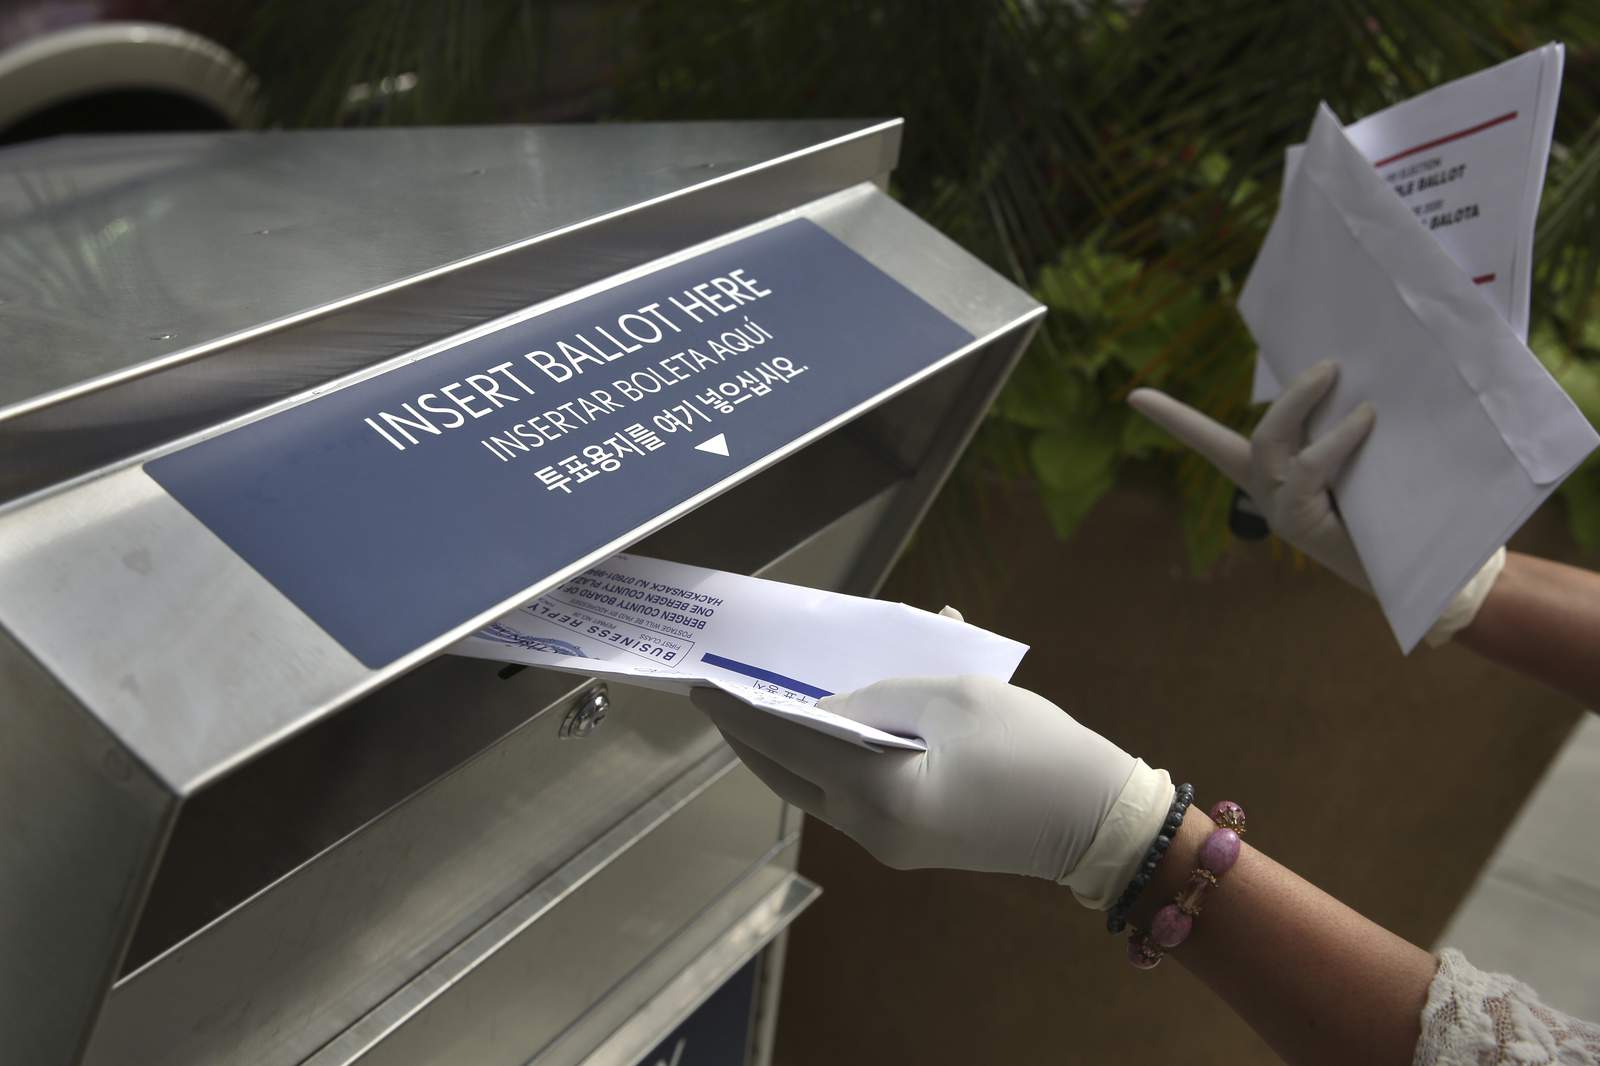 Voting absentee in 2020 election? How to find your Michigan drop box